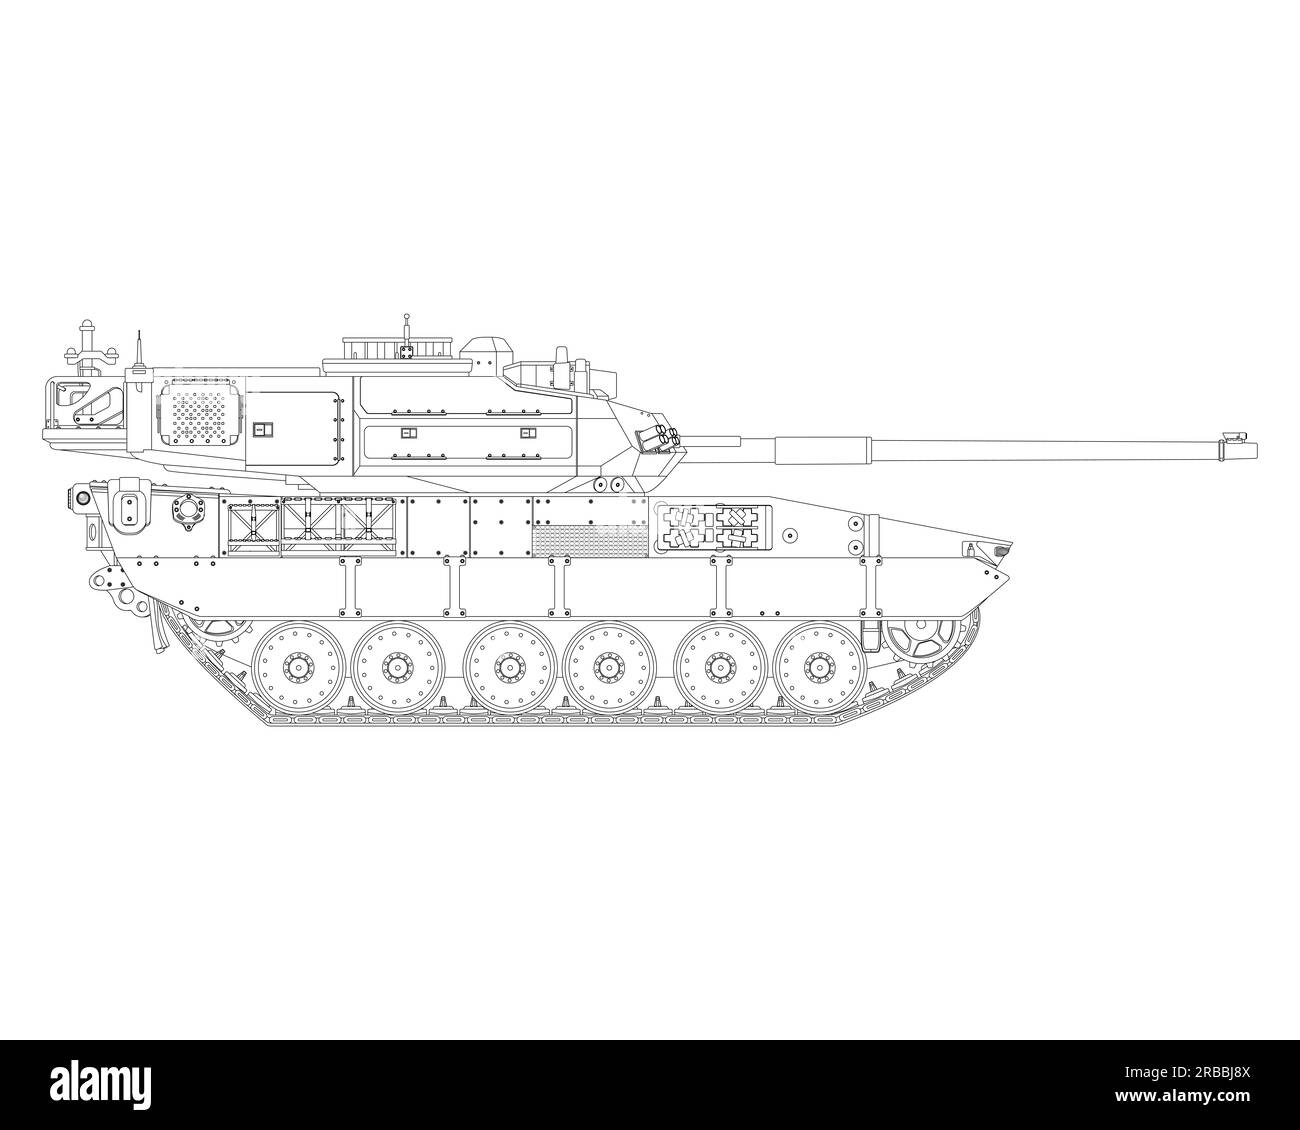 Main battle tank in line art. Armored fighting vehicle. Special combat military transport. Detailed illustration isolated on white background. Stock Photo